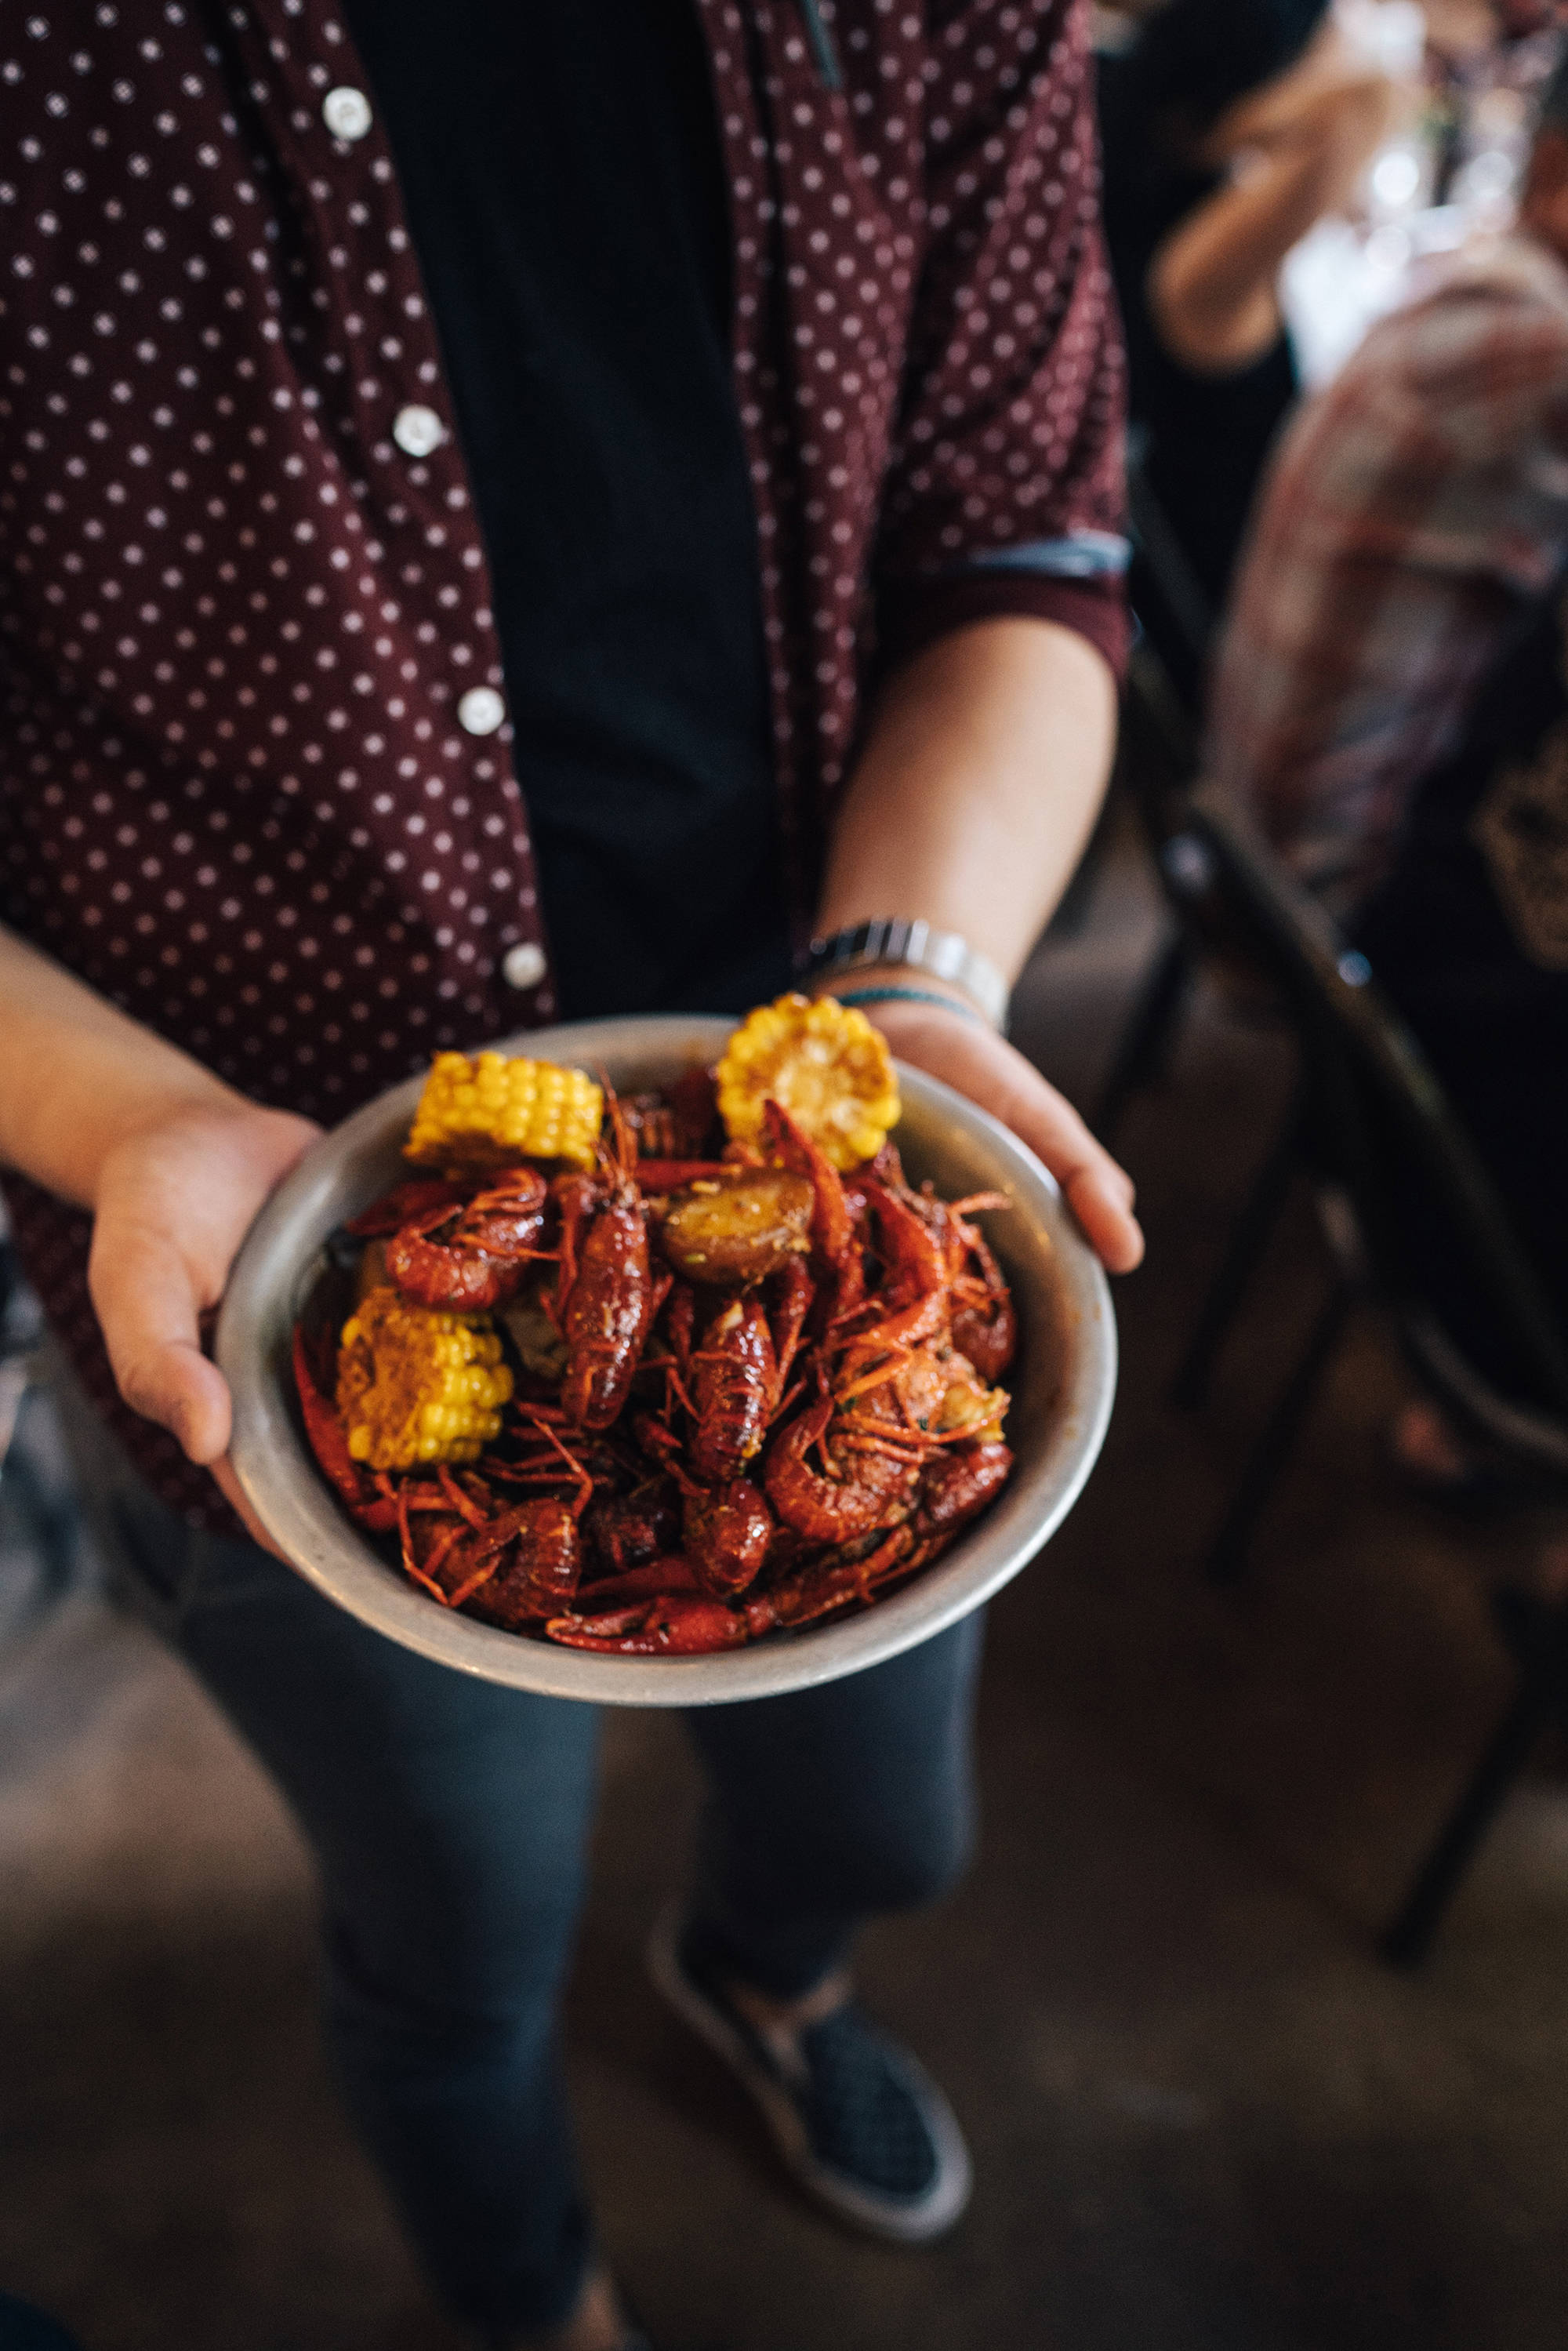 eat some boiled crawfish while you're down south